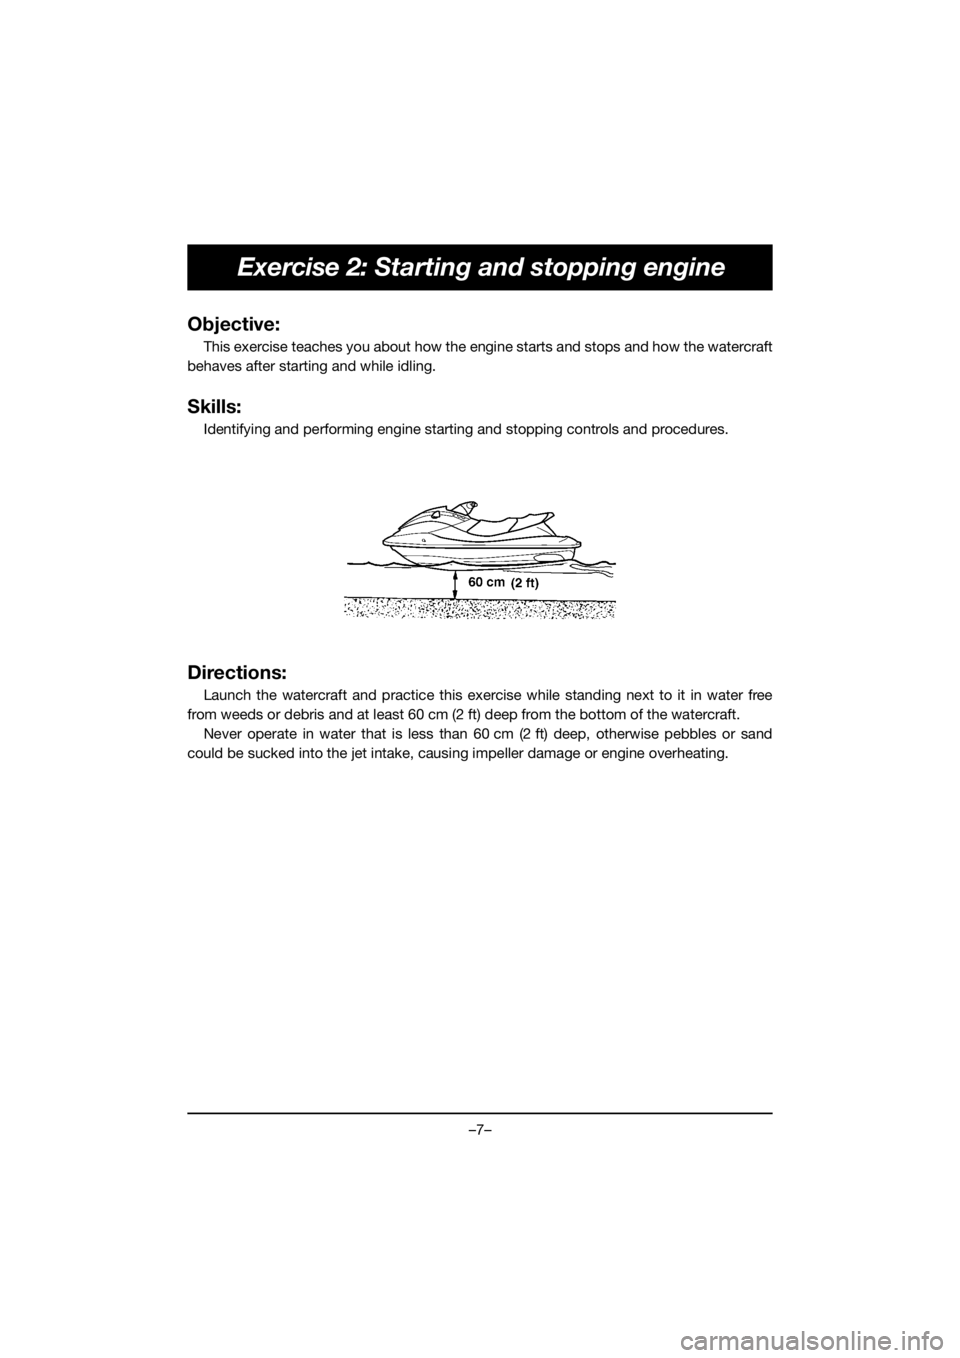 YAMAHA EX SPORT 2019  ΟΔΗΓΌΣ ΧΡΉΣΗΣ (in Greek) –7–
Exercise 2: Starting and stopping engine
Objective:
This exercise teaches you about how the engine starts and stops and how the watercraft
behaves after starting and while idling.
Skills:
Iden